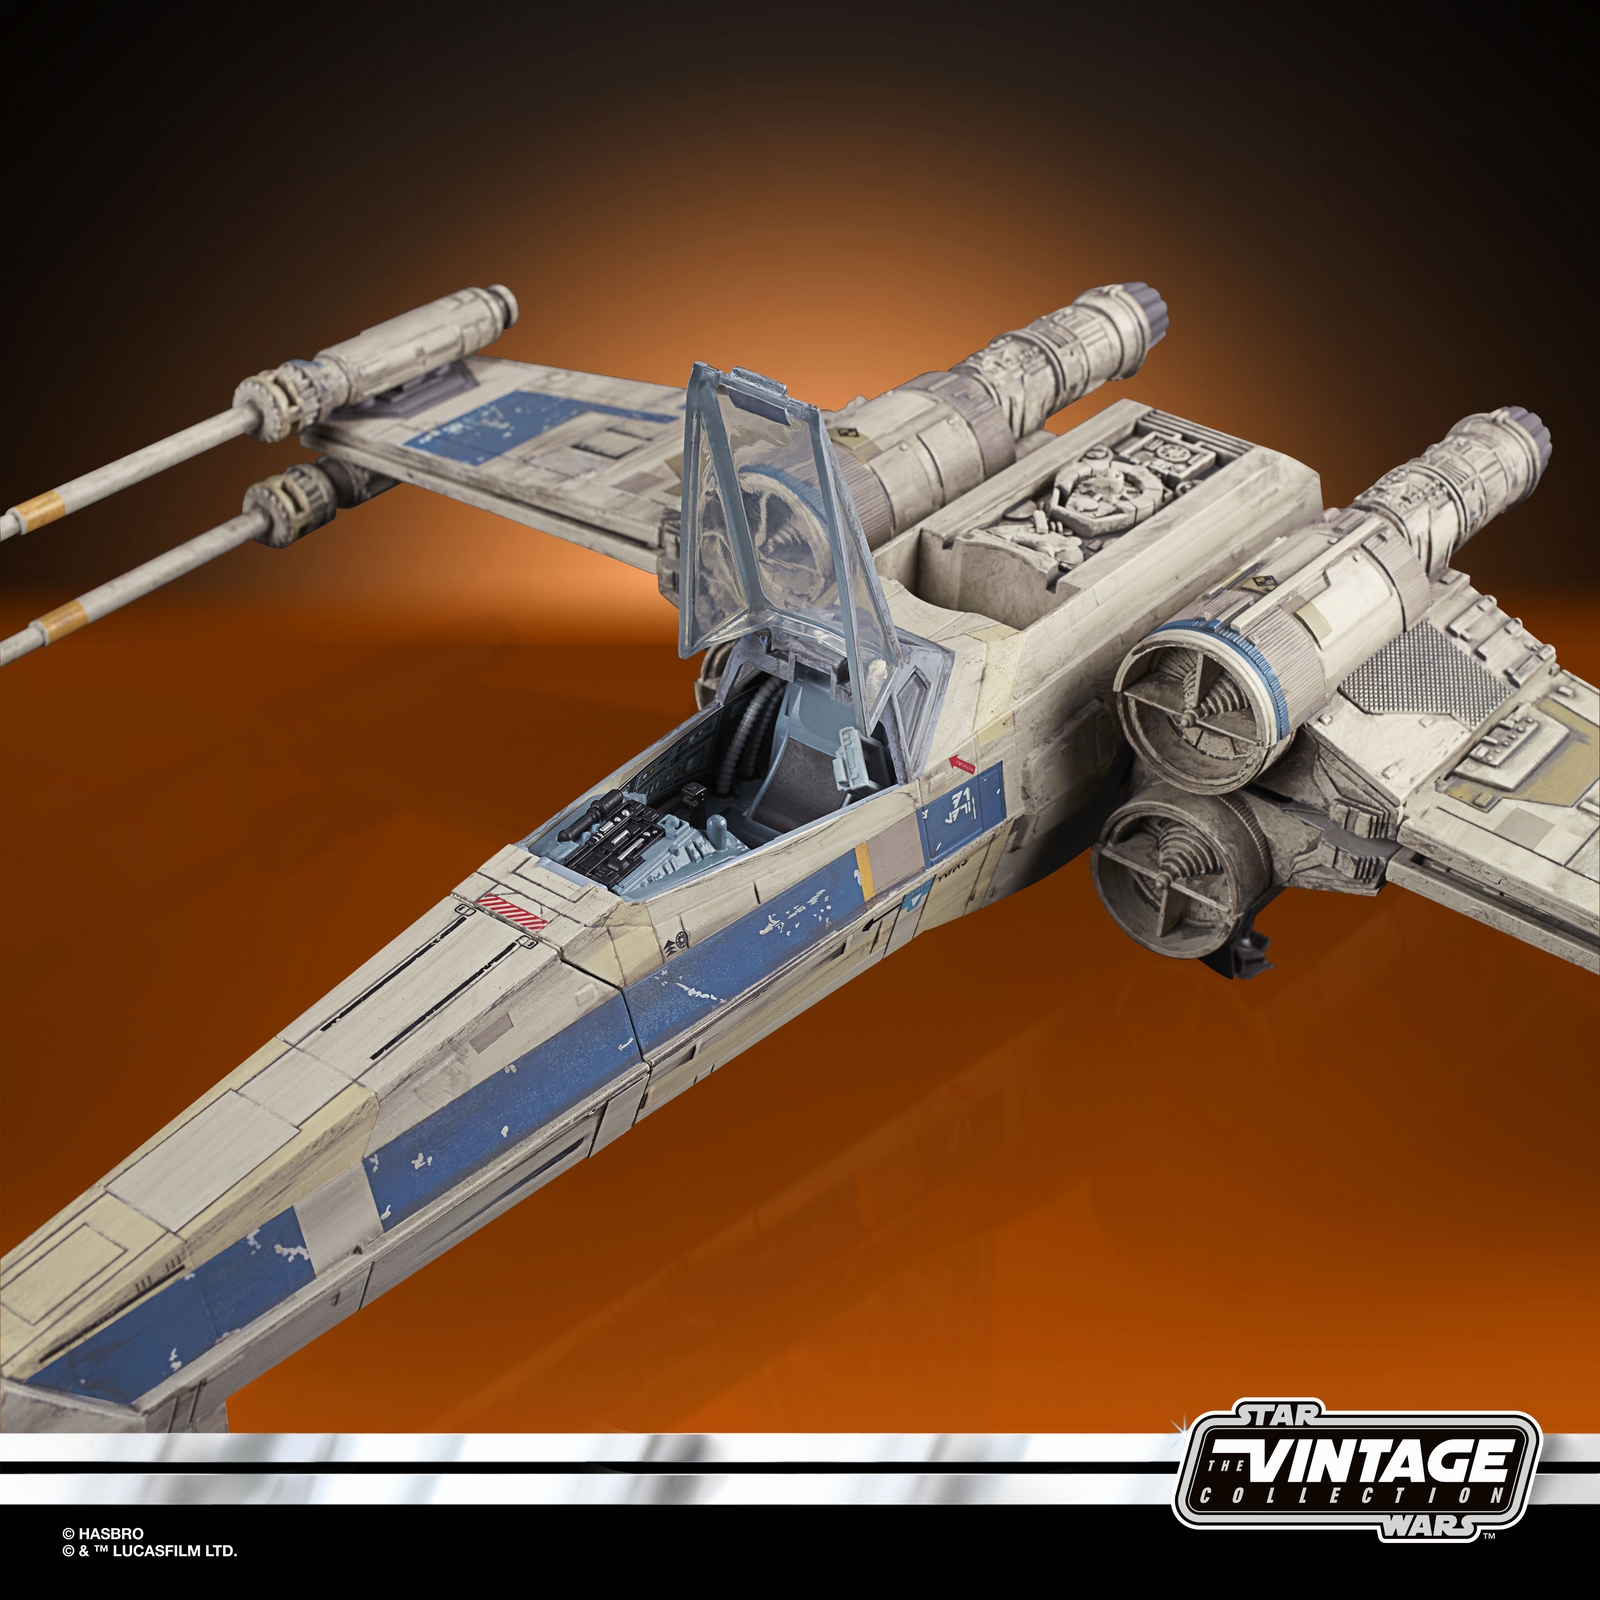 STAR WARS THE VINTAGE COLLECTION ANTOC MERRICK’S X-WING FIGHTER Vehicle and Figure - oop 4.jpg